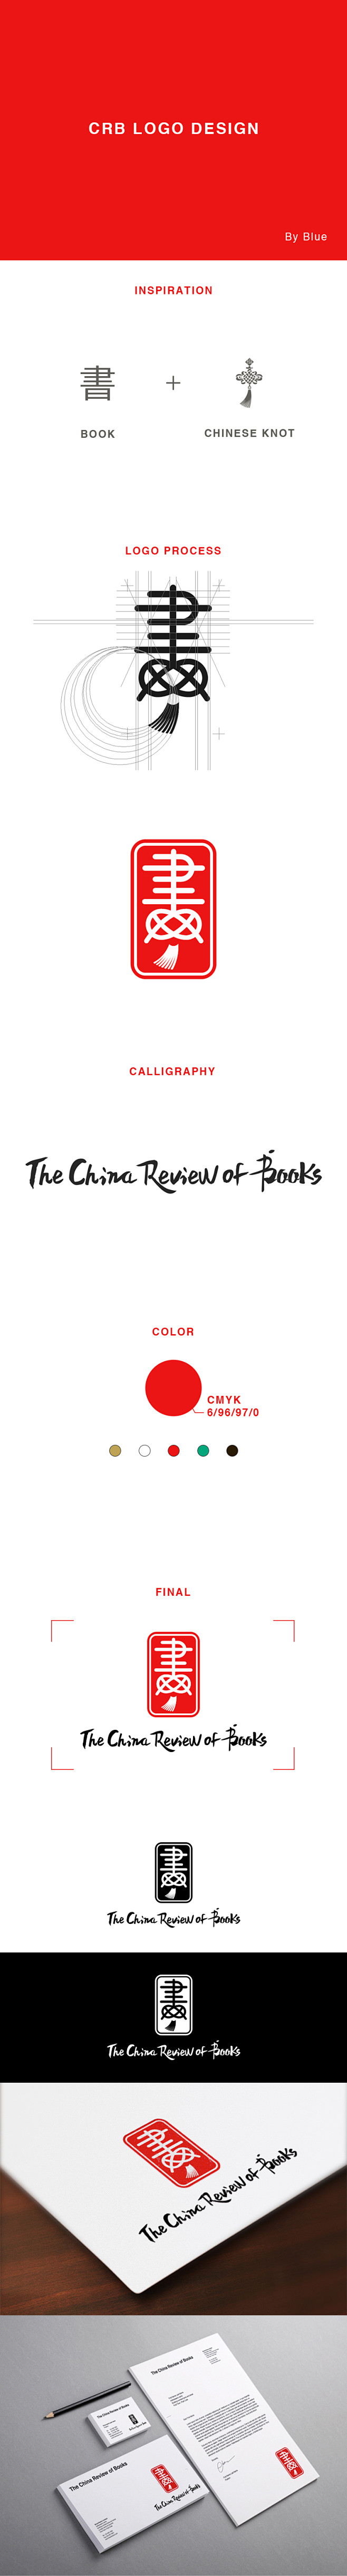 China Review of Book...